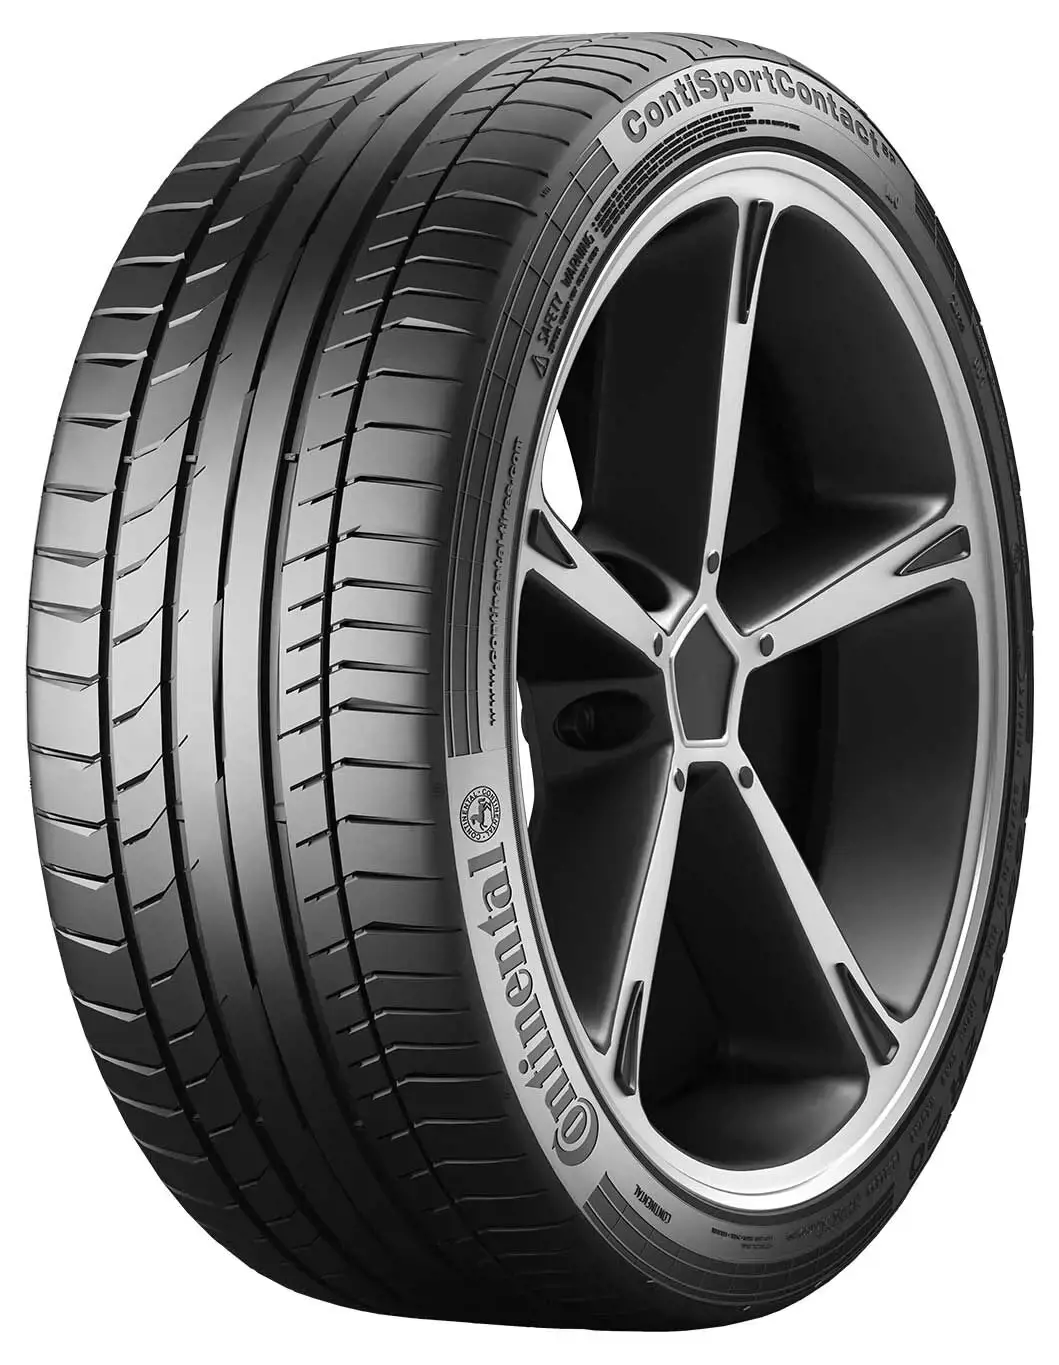 Continental P 97Y 245/40 5 SportContact ZR18